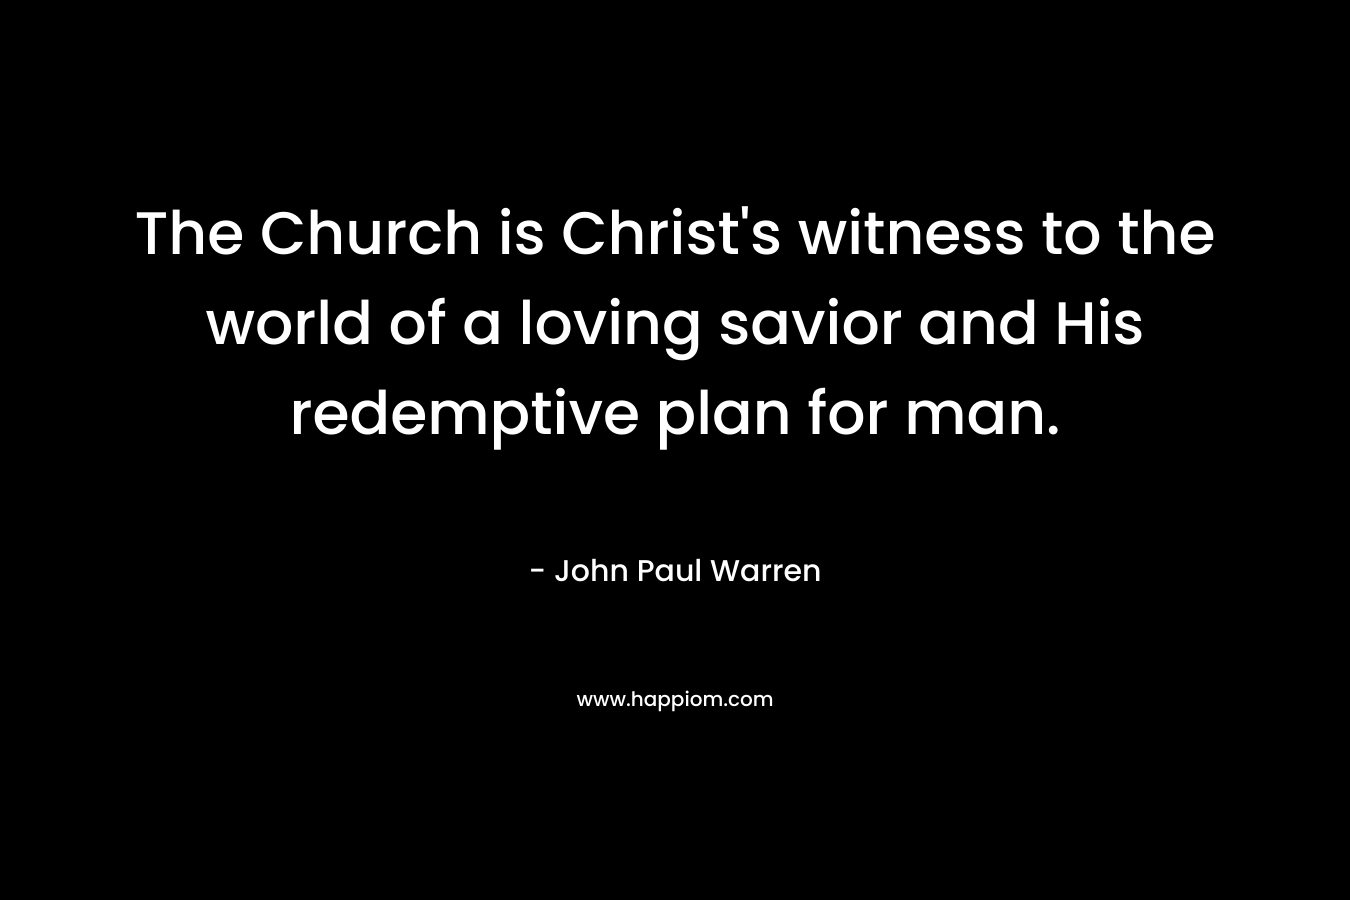 The Church is Christ's witness to the world of a loving savior and His redemptive plan for man.